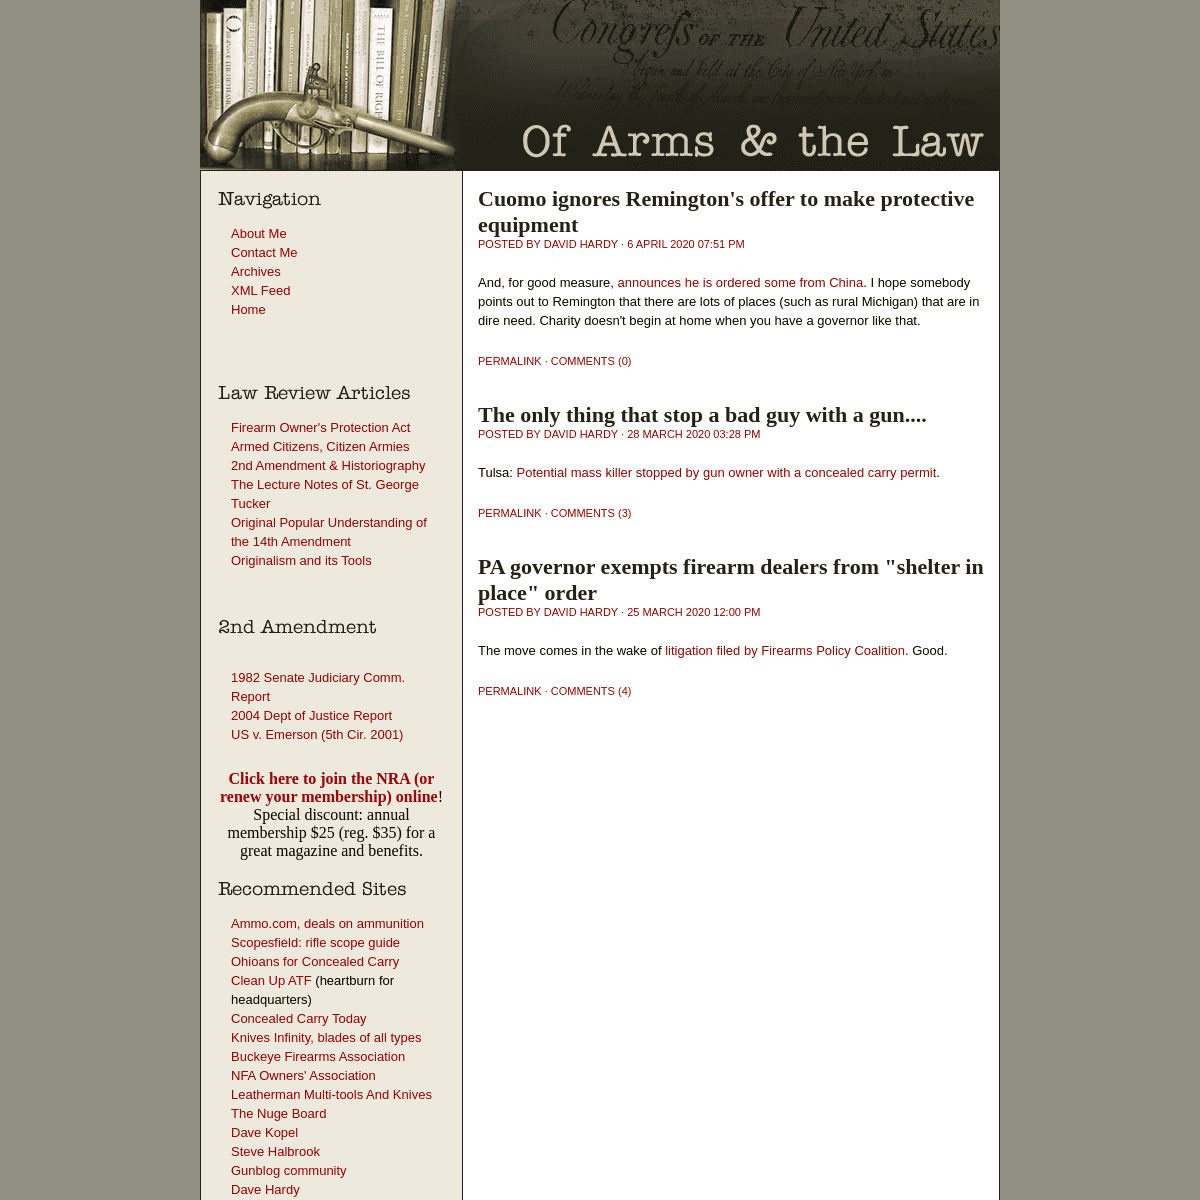 A complete backup of armsandthelaw.com